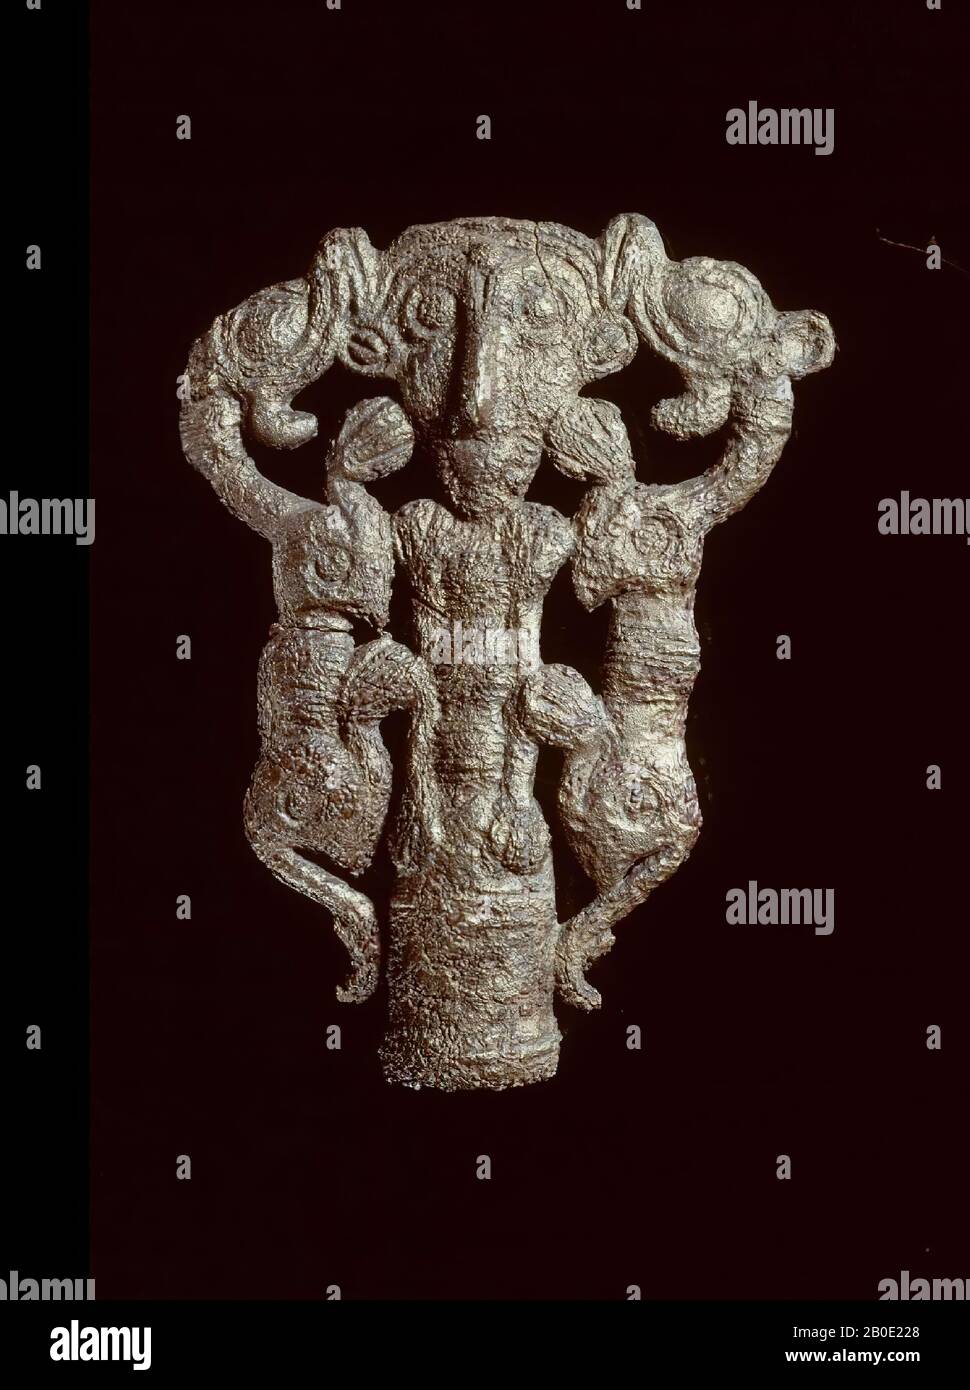 A bronze standard crown. Only worked out in detail at the front. The human figure has been reduced here to one enormous head. On the other side of the creature with a human head two fabulous creatures or lions are depicted., Ceremonial object, metal, bronze, H 9.5 cm, Iron Age III 800-600 BC, Iran Stock Photo